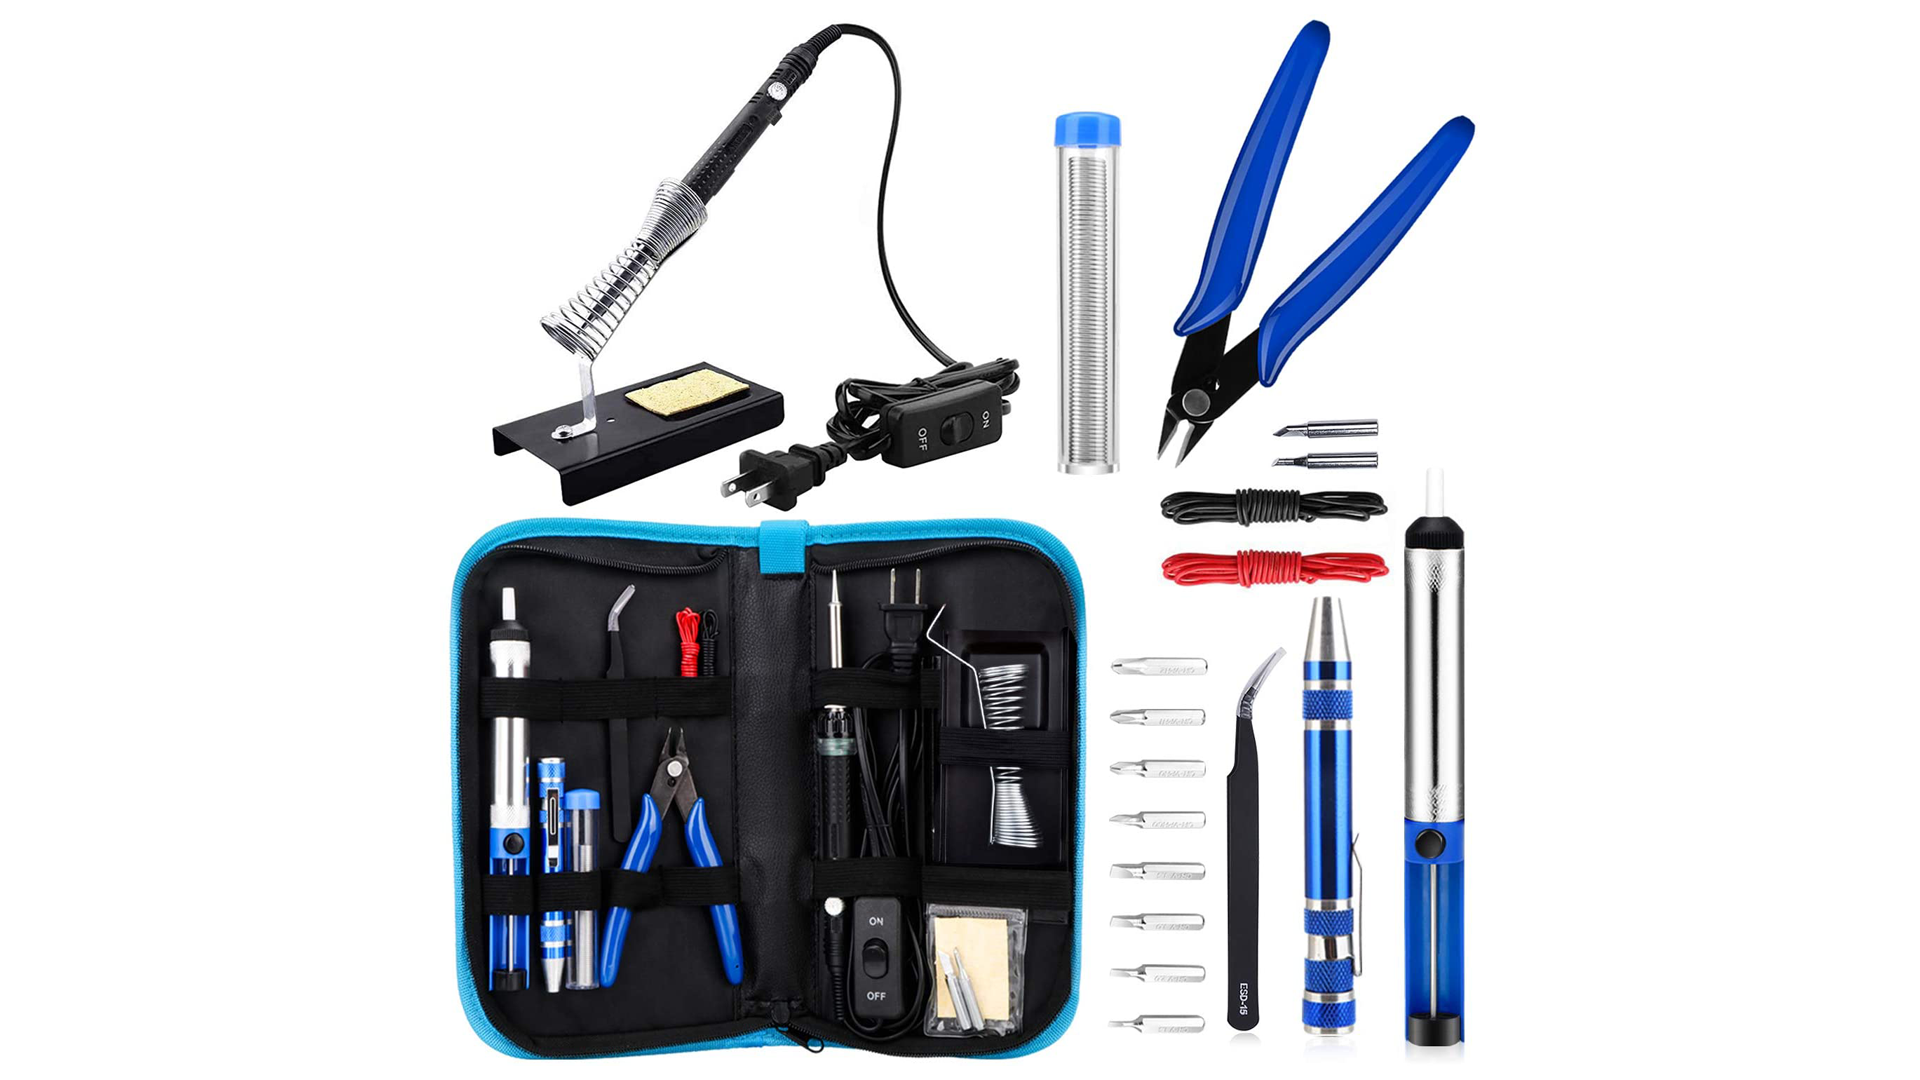 THE ANBES Soldering Iron Kit, Upgraded 60W Adjustable Temperature Welding Tool with ON-OFF Switch, 8-in-1 Screwdrivers, 2pcs Soldering Iron Tips, Solder Sucker, Wire Cutter,Tweezers,Soldering Iron Stand